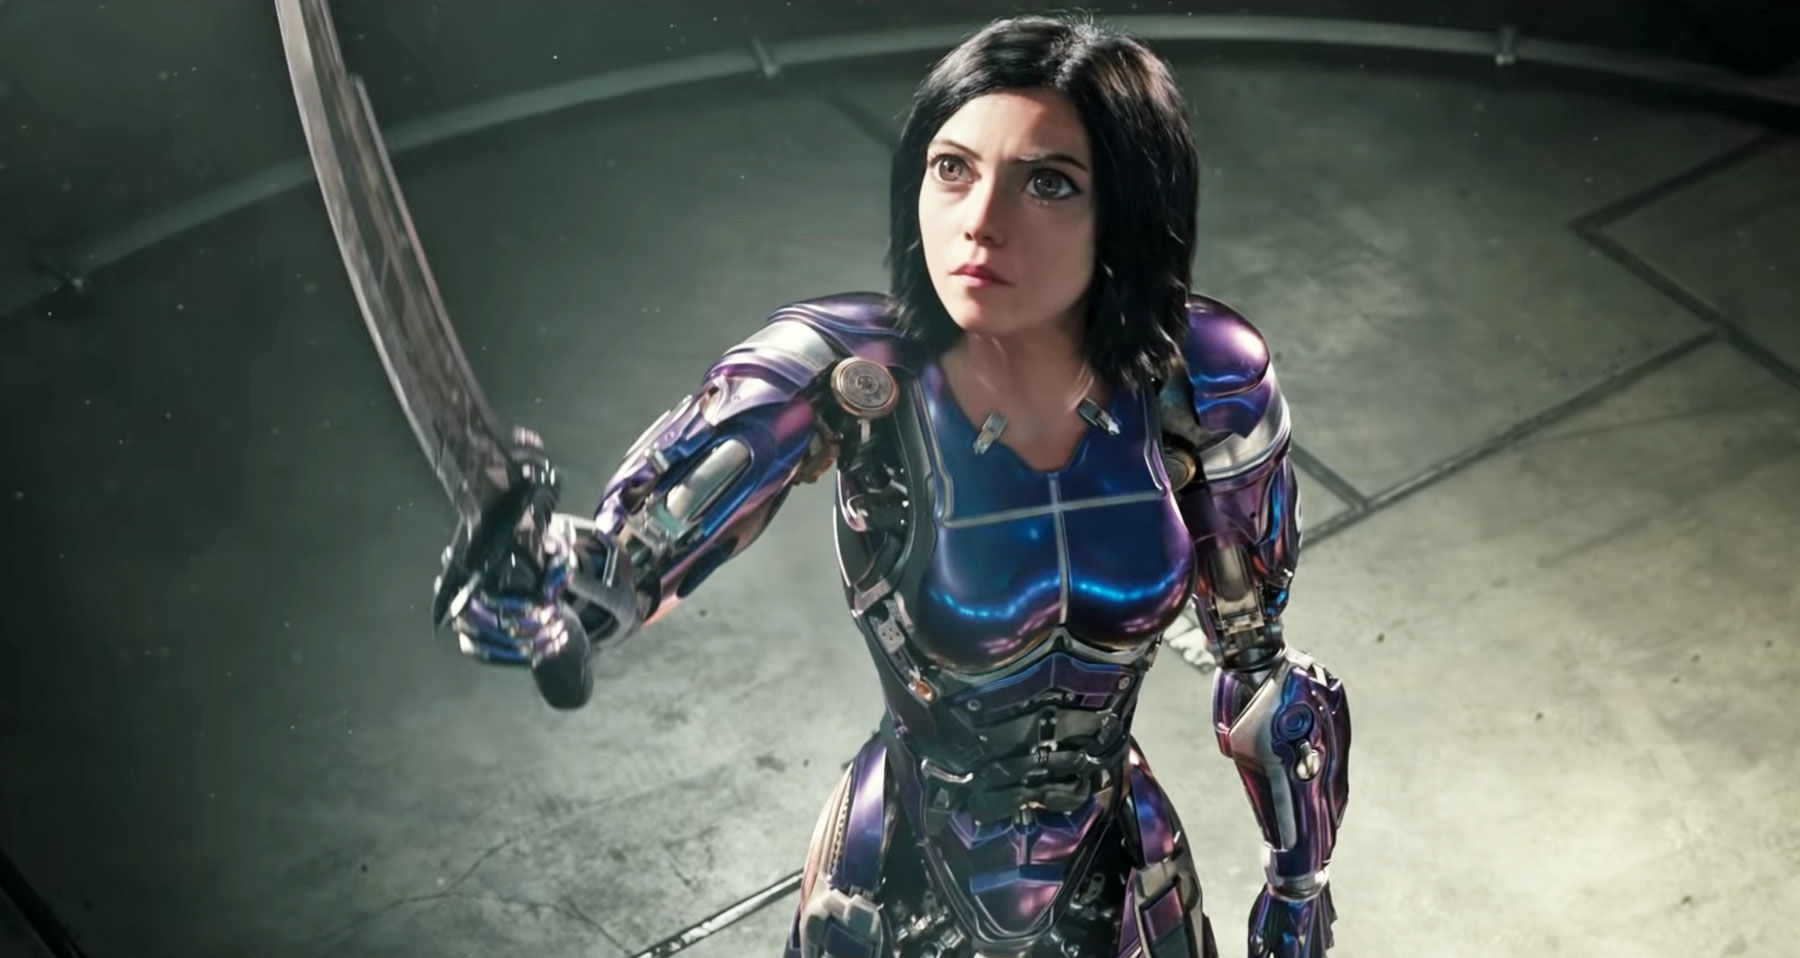 Action-packed ‘Alita: Battle Angel’ trailer shows off some combat | DeviceDaily.com